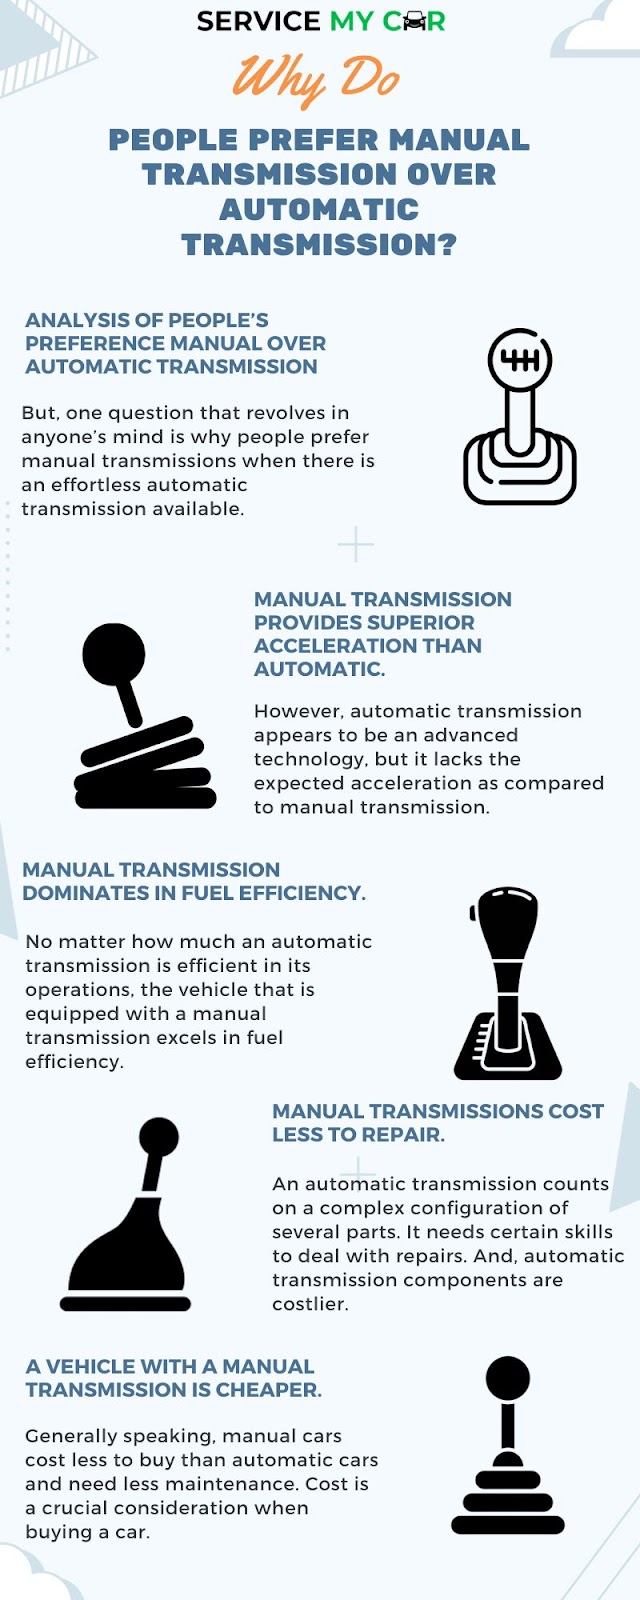 Why Do People Prefer Manual Over Automatic Transmission?